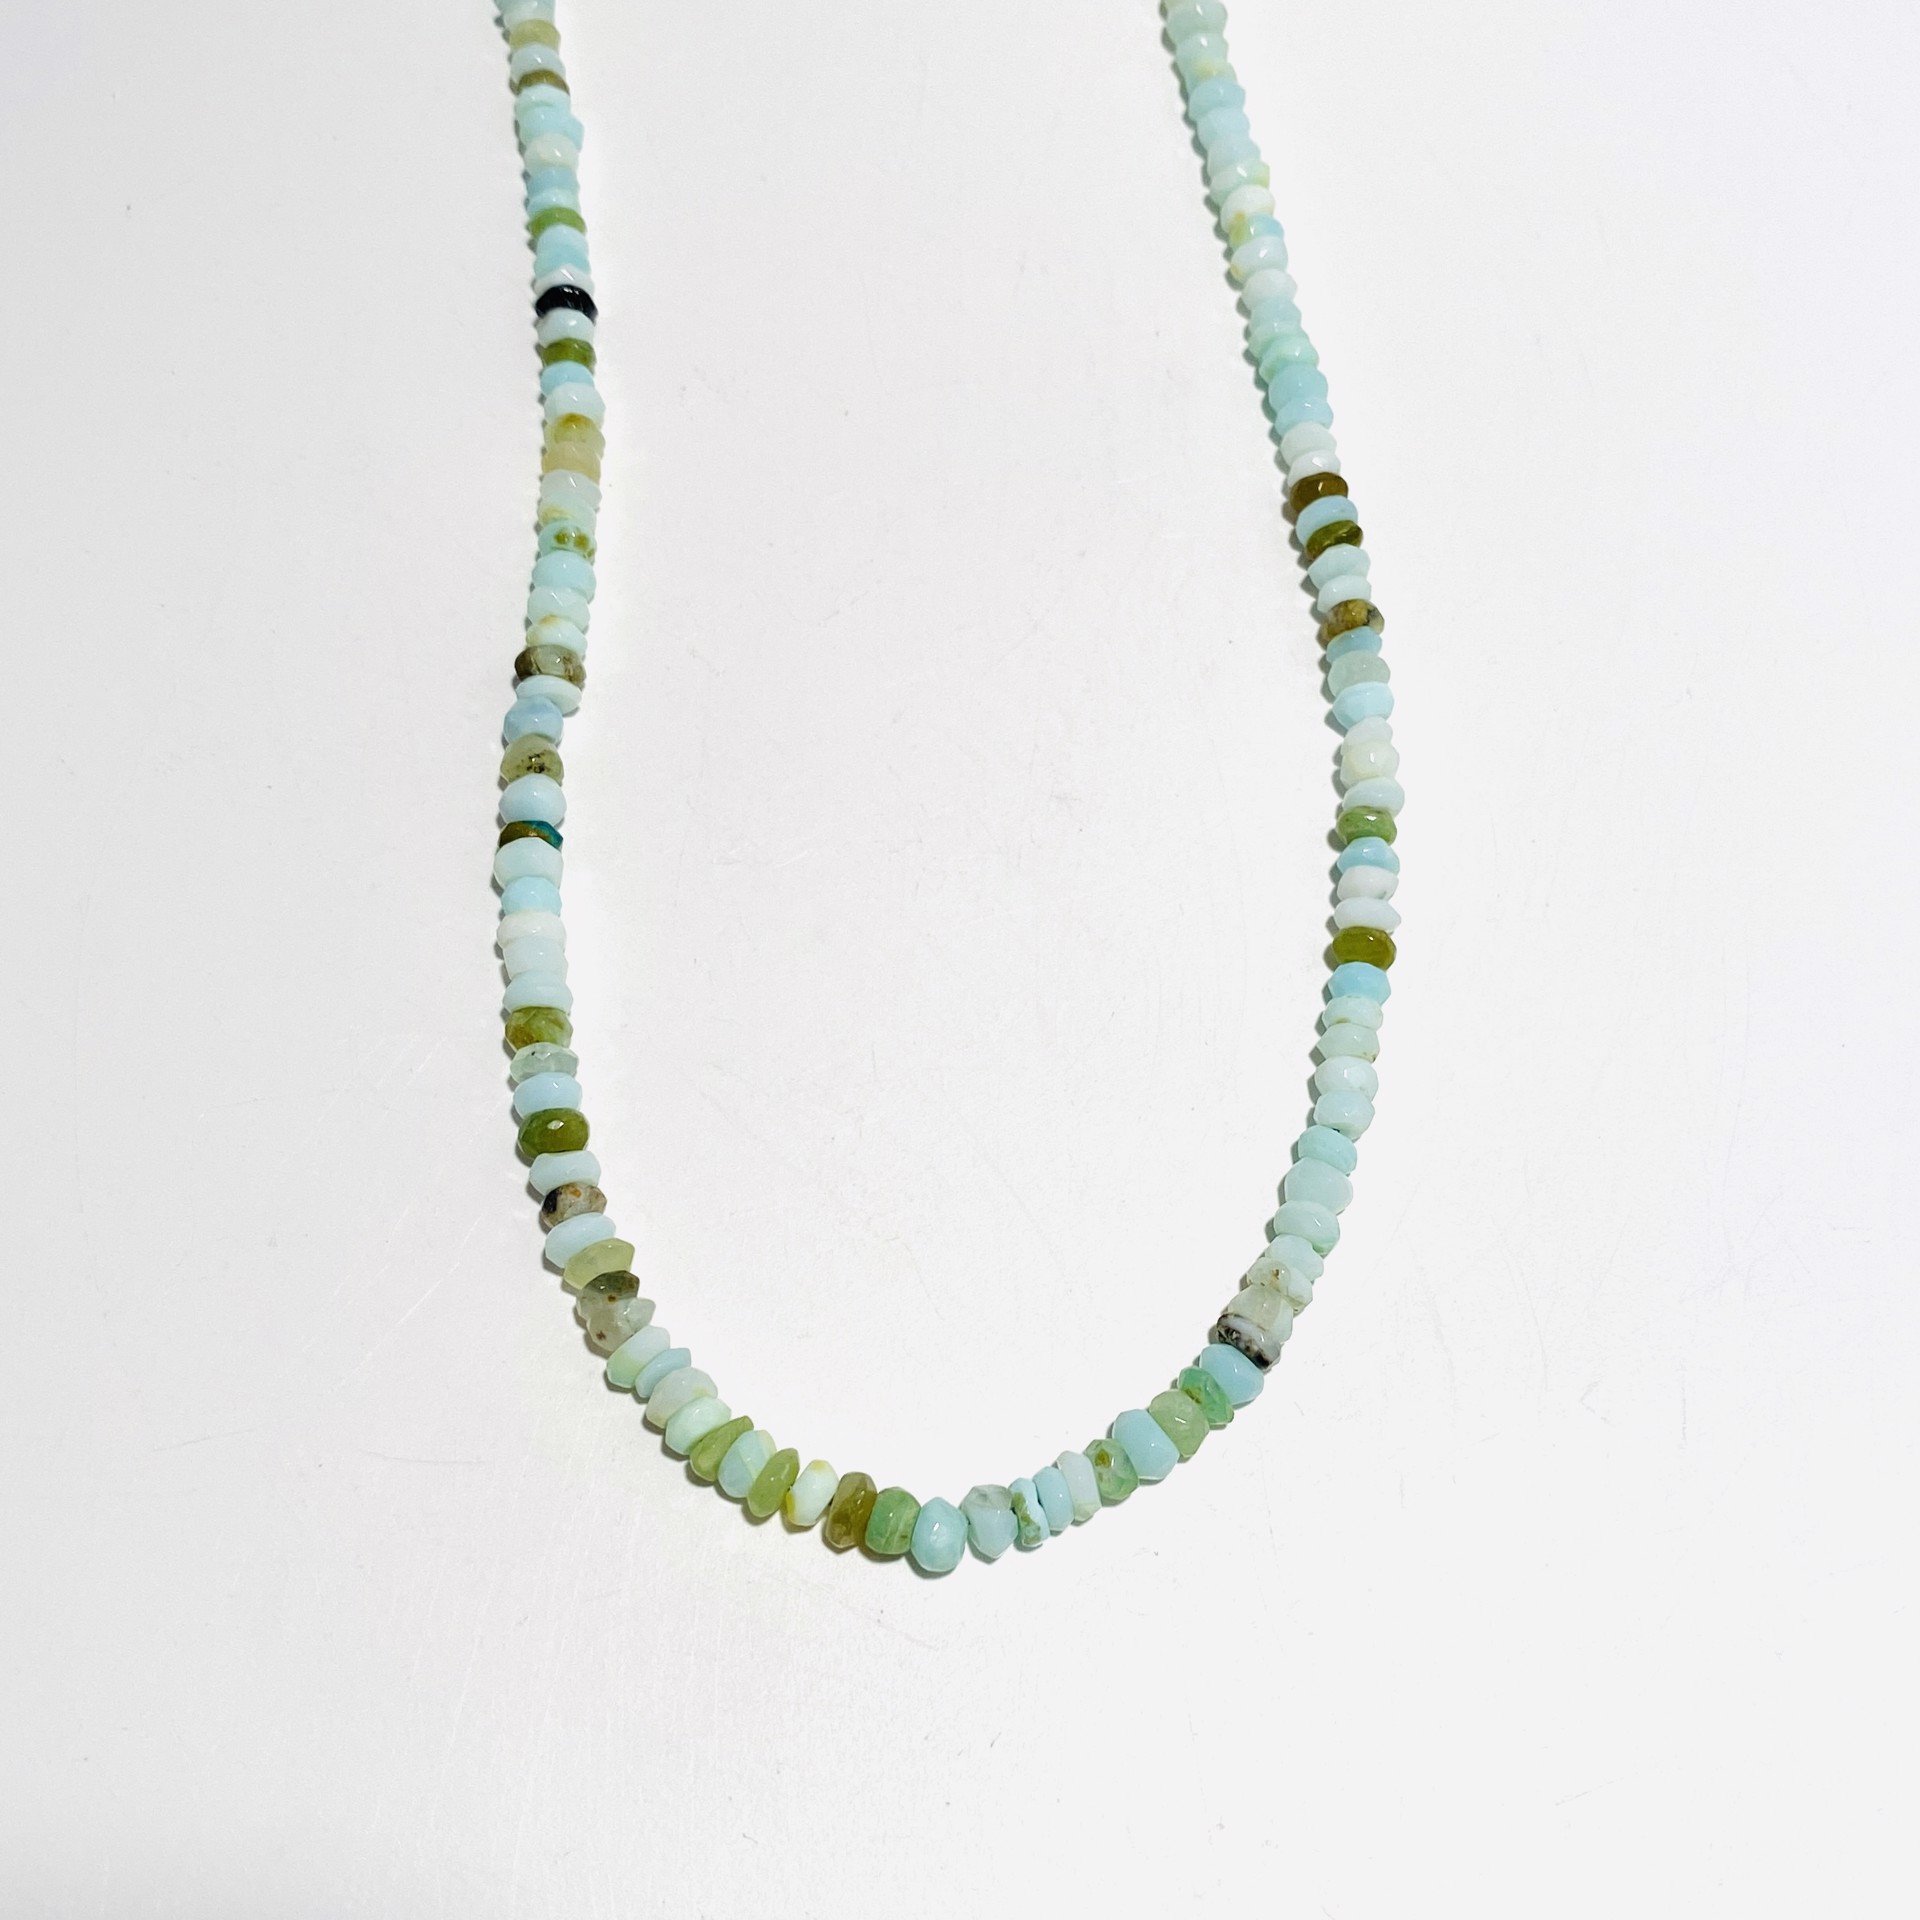 Faceted Peruvian Opal Strand Necklace NT23-31 by Nance Trueworthy